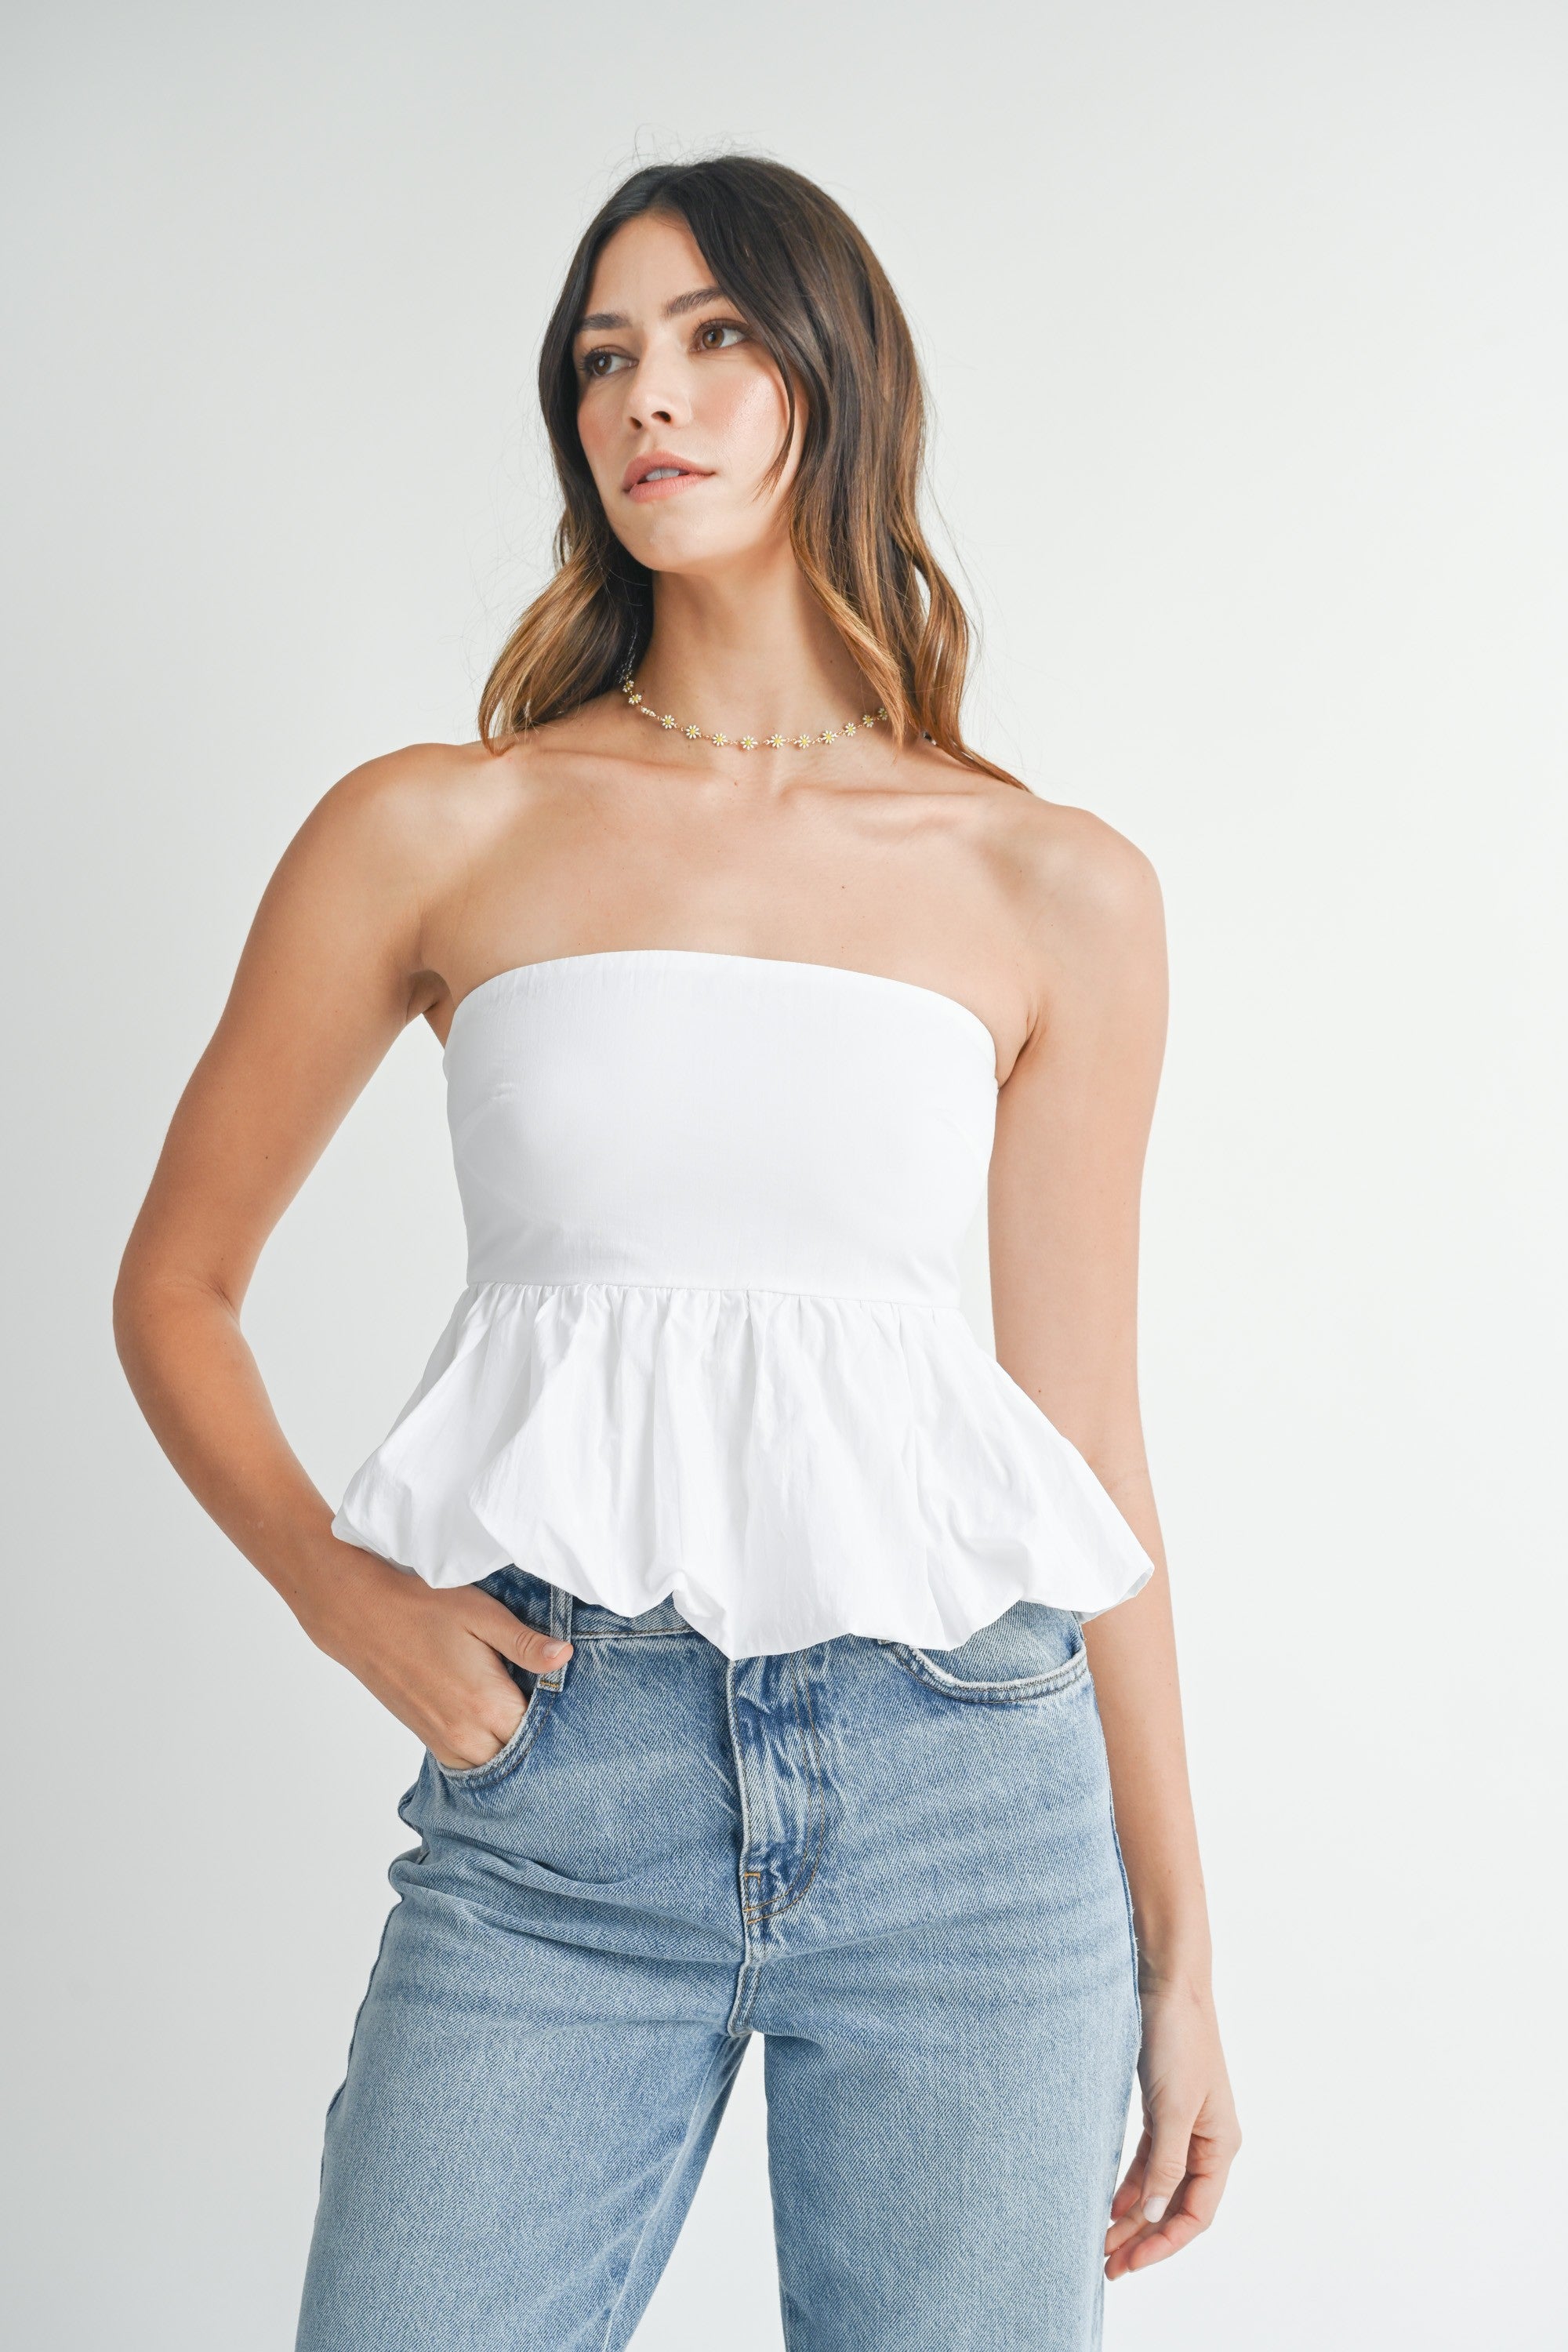 Mable | White Strapless Peplum Top | Sweetest Stitch Boutique